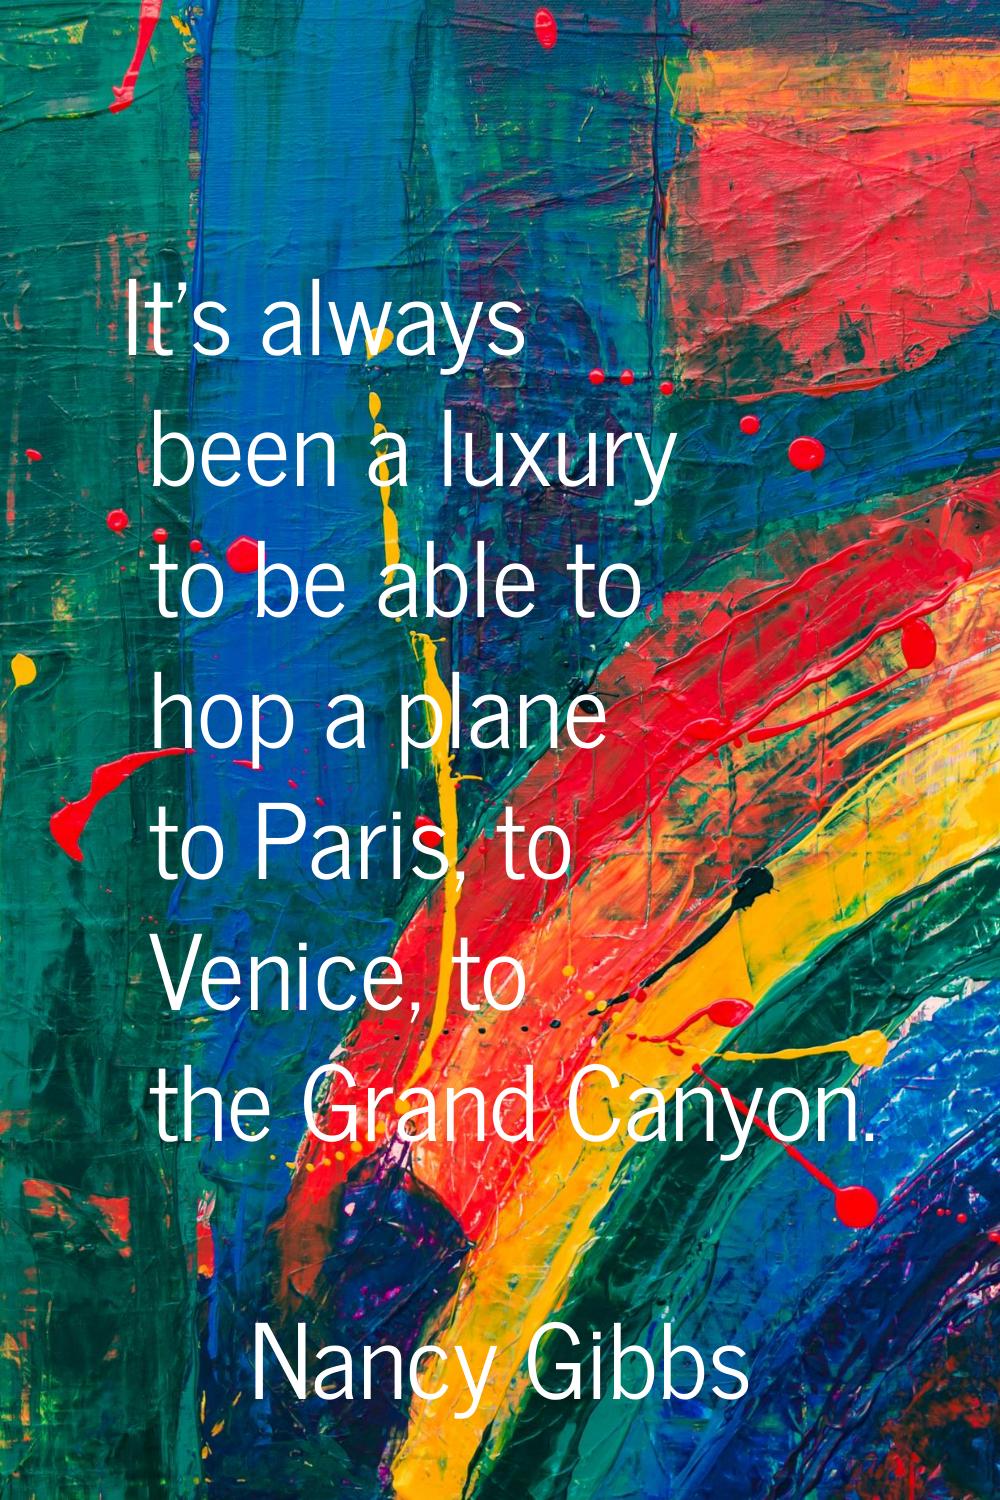 It's always been a luxury to be able to hop a plane to Paris, to Venice, to the Grand Canyon.